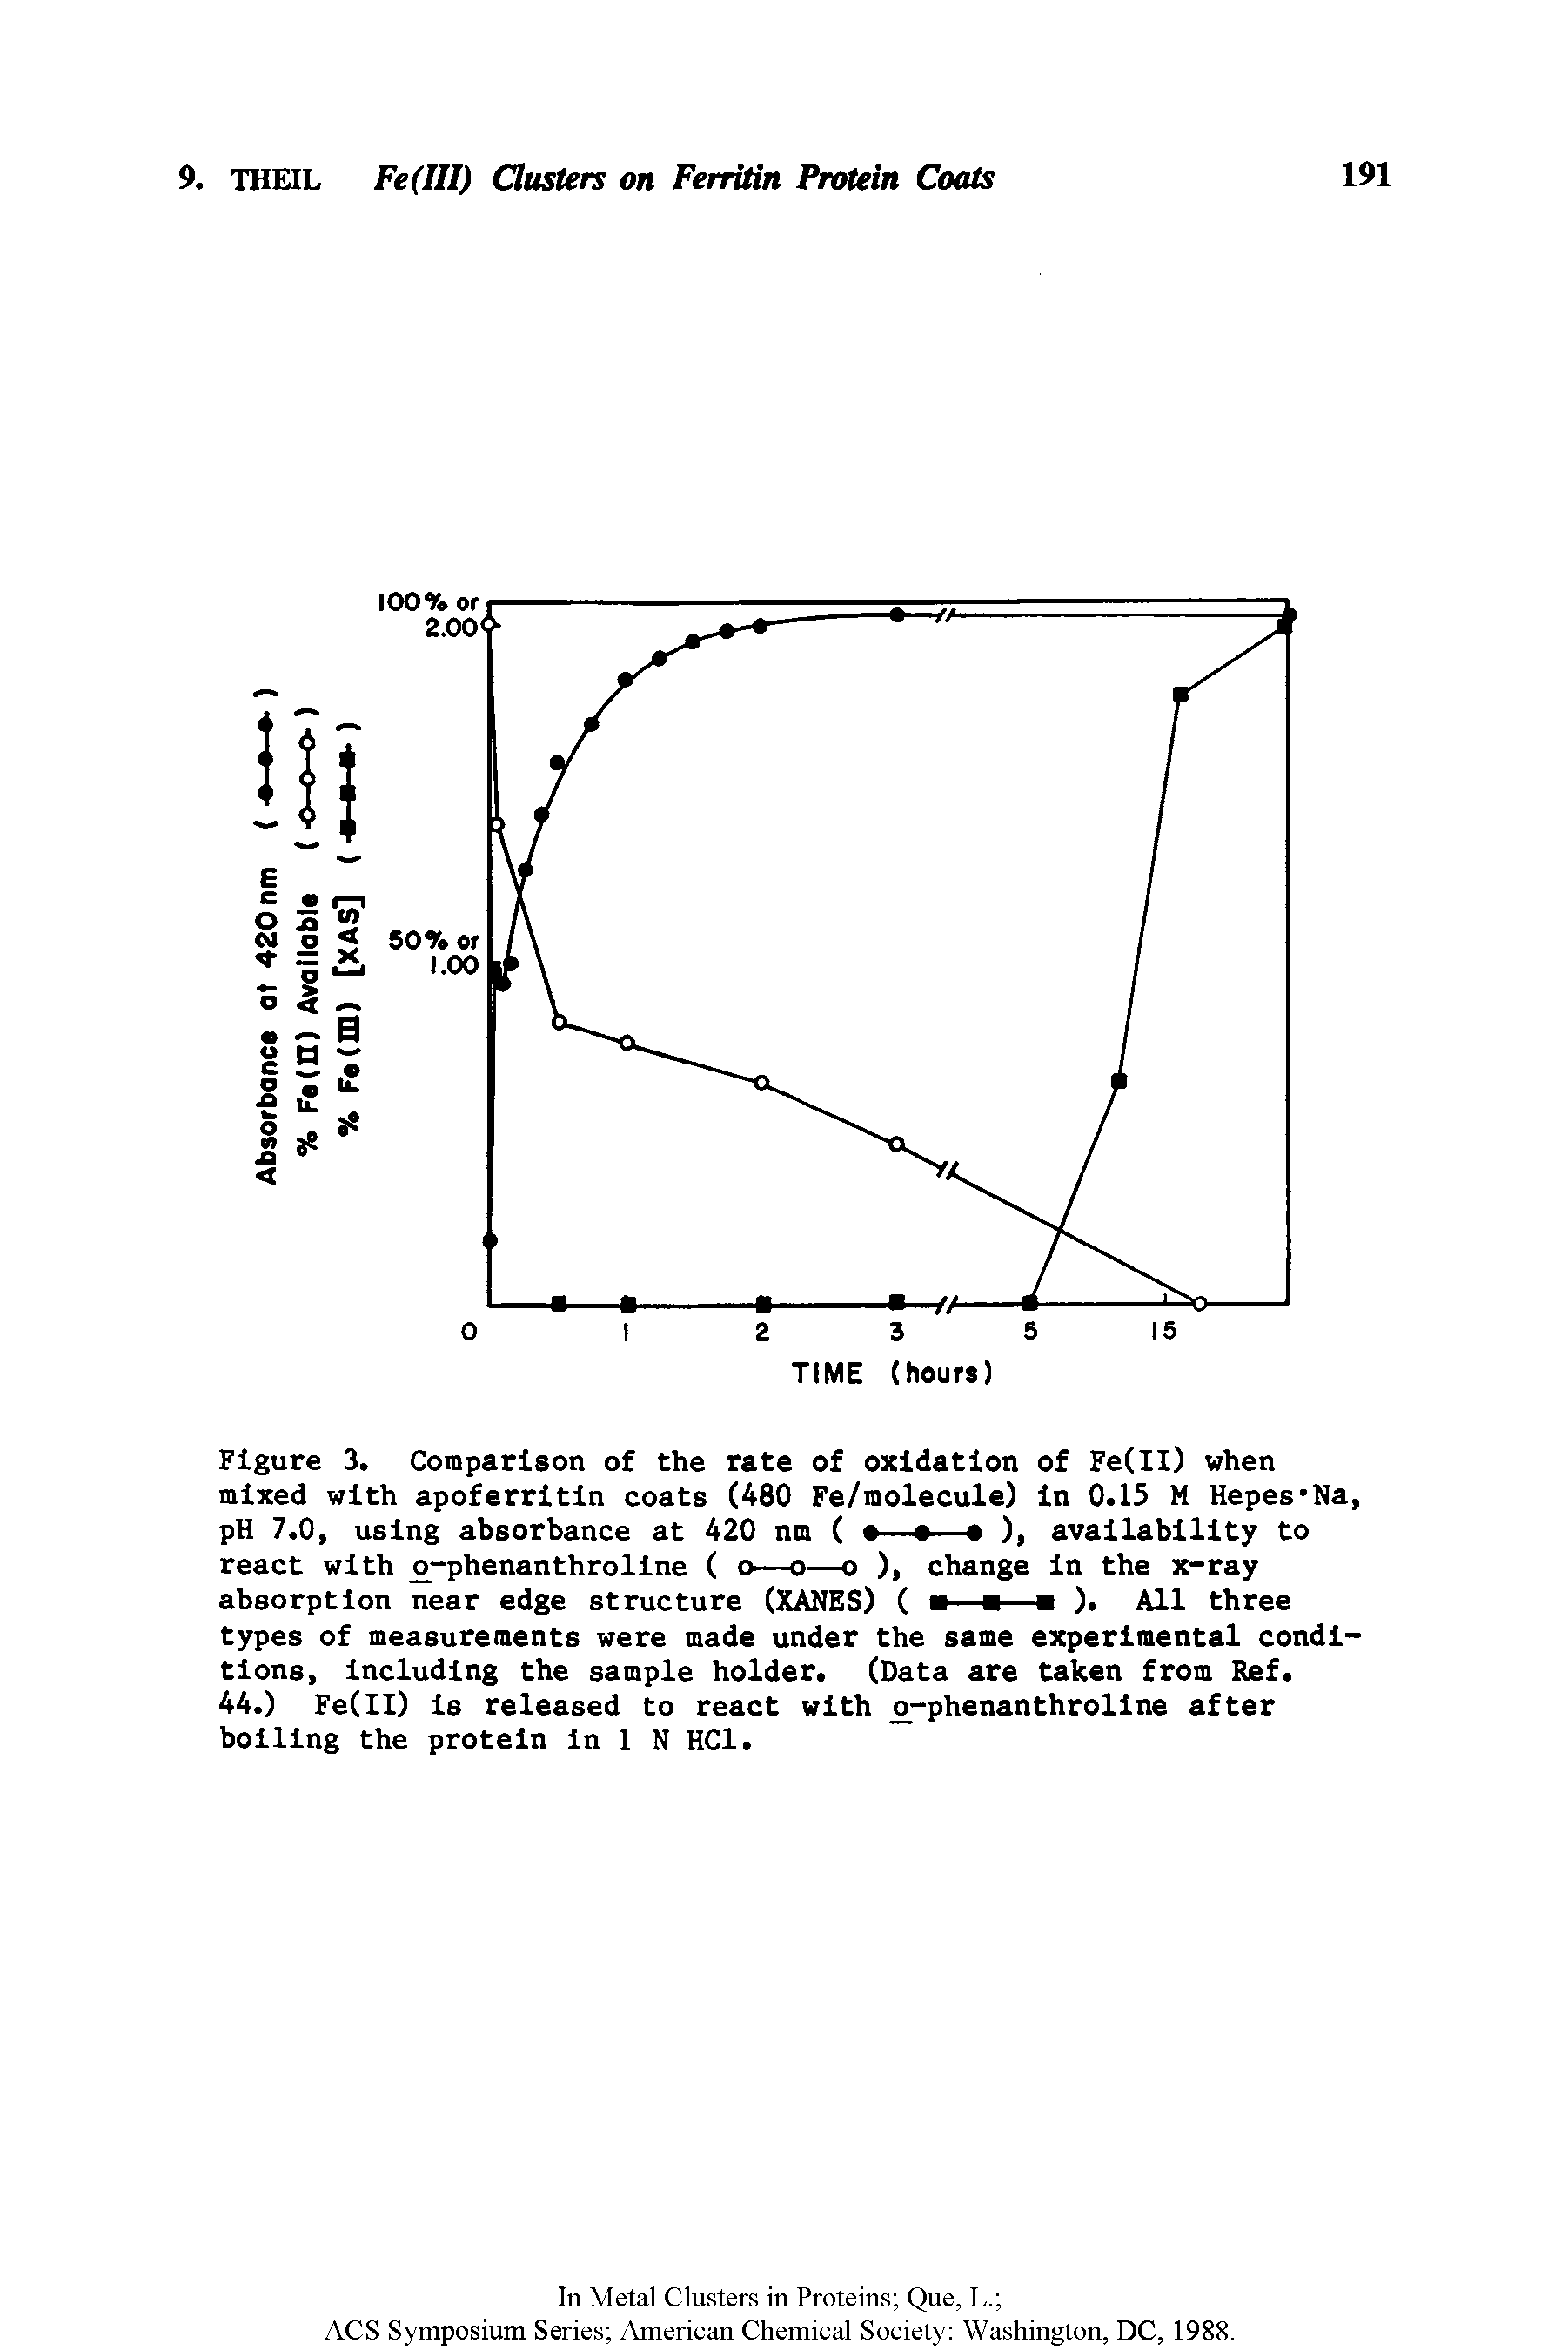 Figure 3. Comparison of the rate of oxidation of Fe(II) when mixed with apoferritin coats (480 Fe/molecule) in 0.15 M Hepes Na, pH 7.0, using absorbance at 420 nm ( a—s— ), availability to react with -phenanthroline ( o—o—o ), change in the x-ray absorption near edge structure (XANES) ( — — ). All three types of measurements were made under the same experimental conditions, including the sample holder. (Data are taken from Ref.